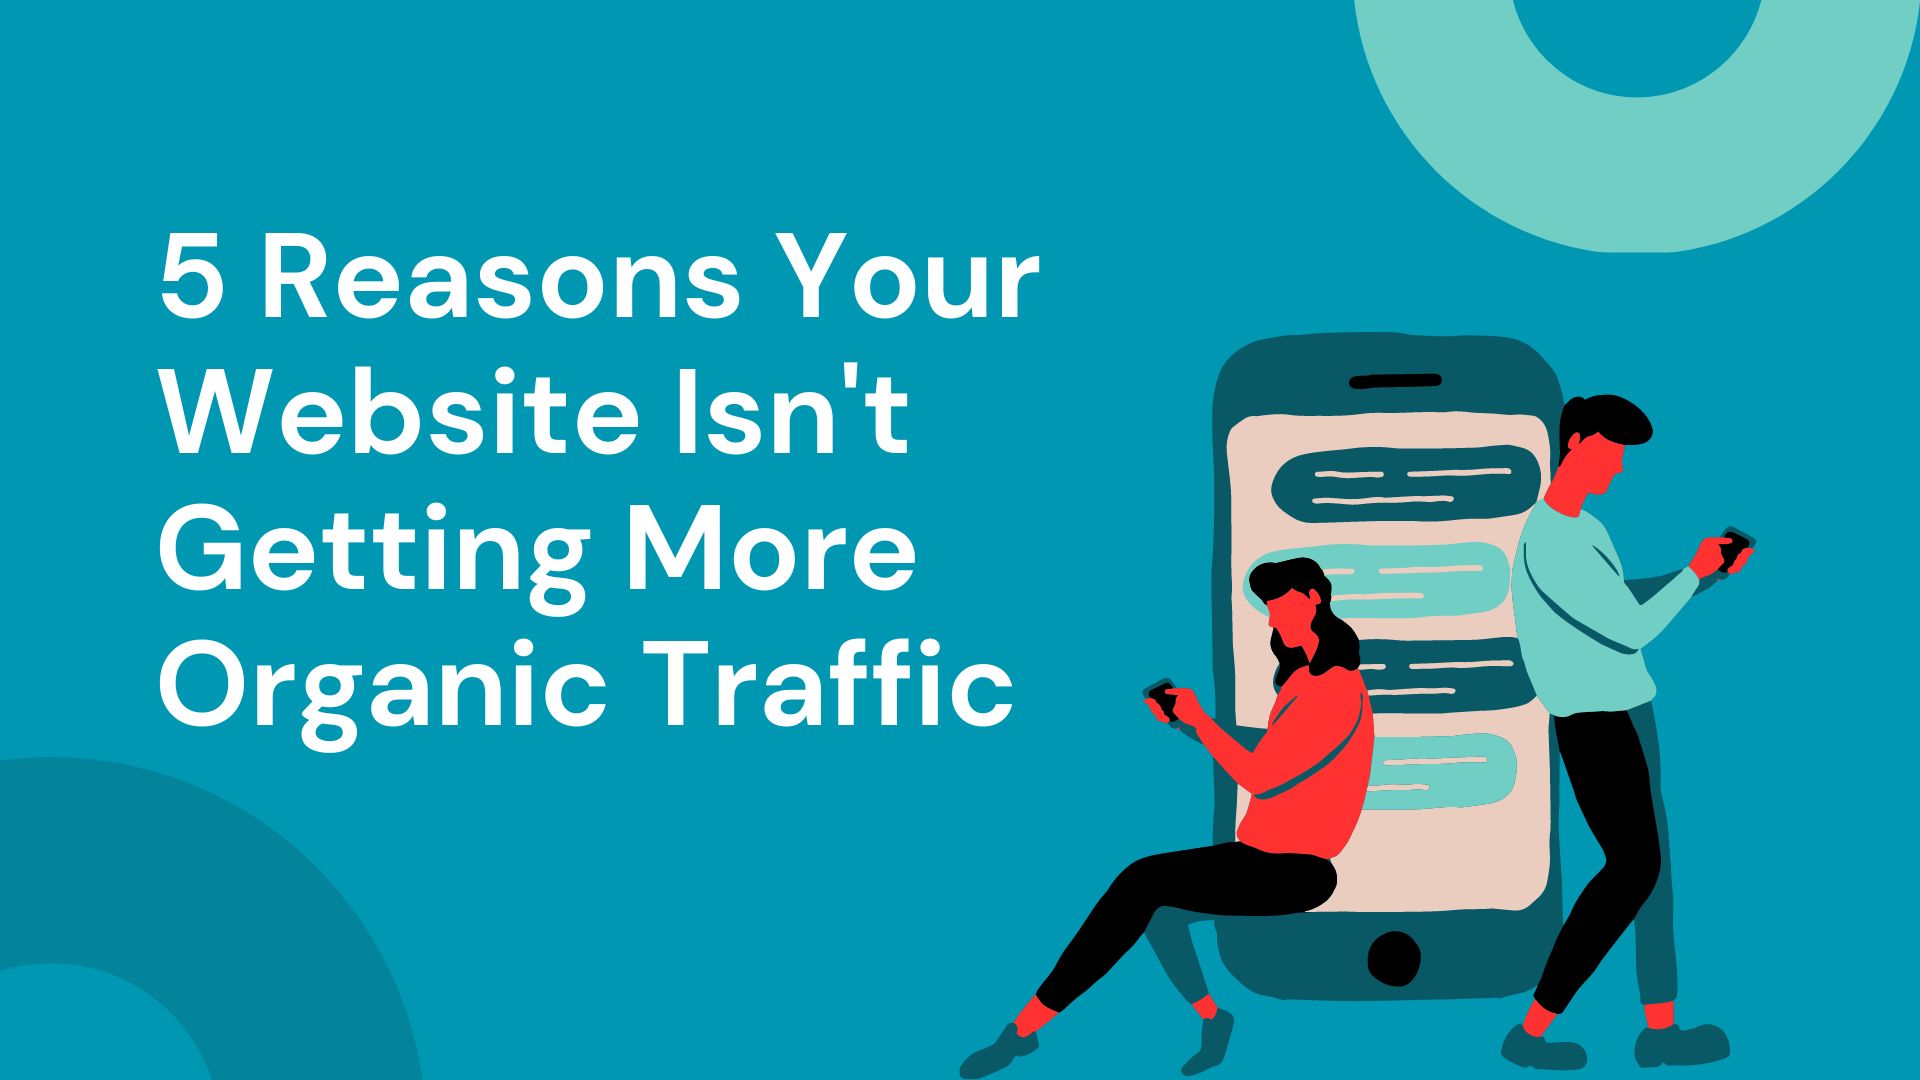 5 Reasons Your Website Isn't Getting More Organic Traffic